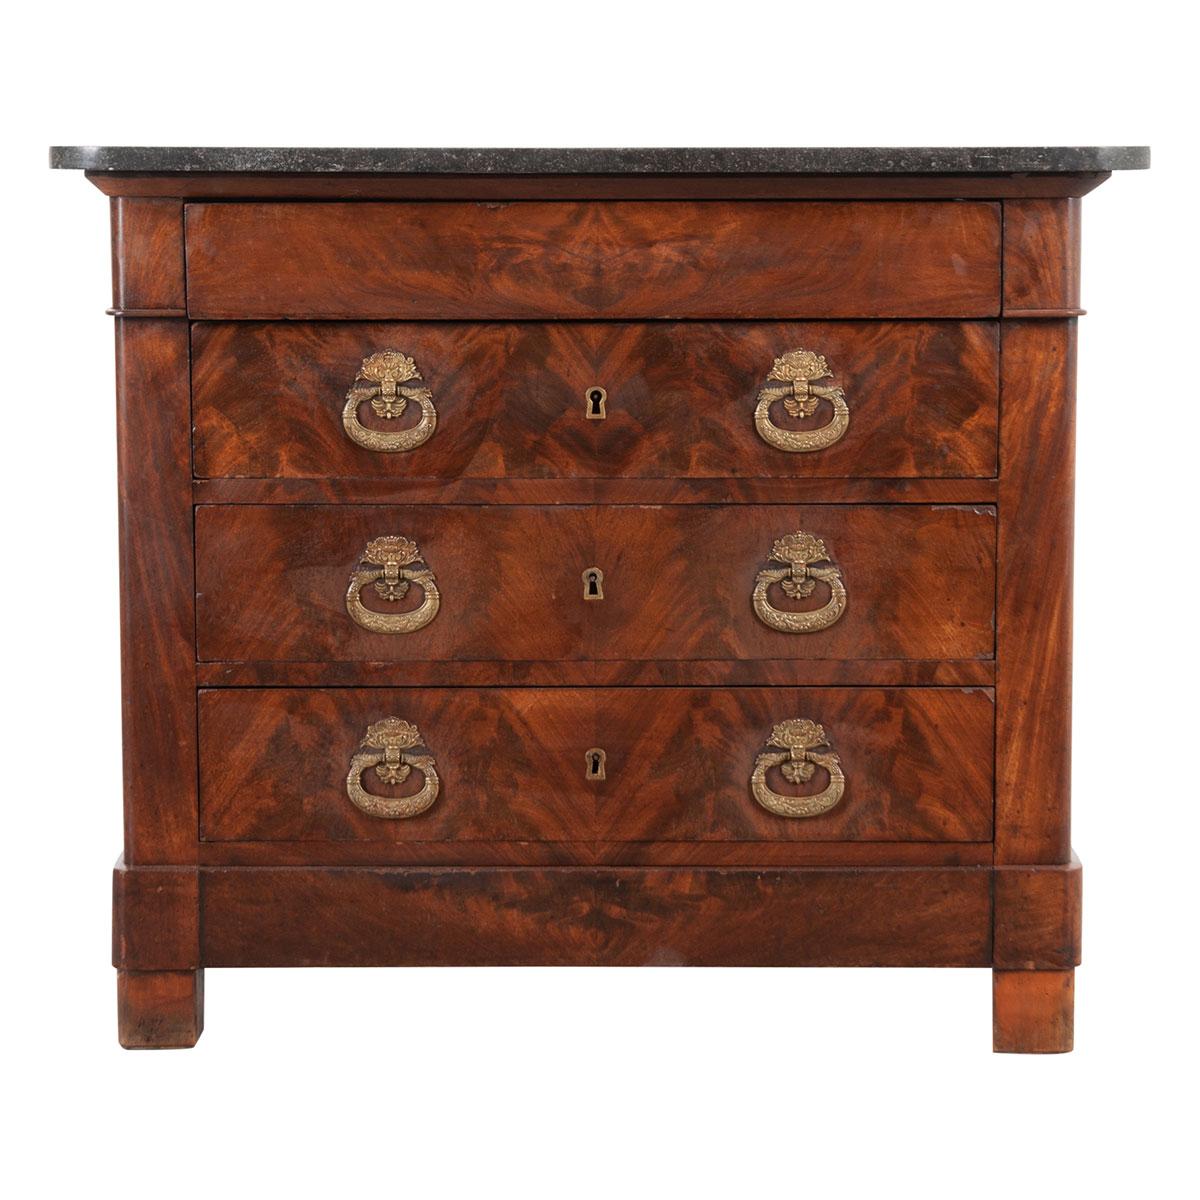 This wonderful Empire mahogany commode was created in 19th century France. Topped with a removable piece of black fossil granite with rounded front corners. The apron houses a hidden drawer without hardware, it opens easily with groves hidden on the